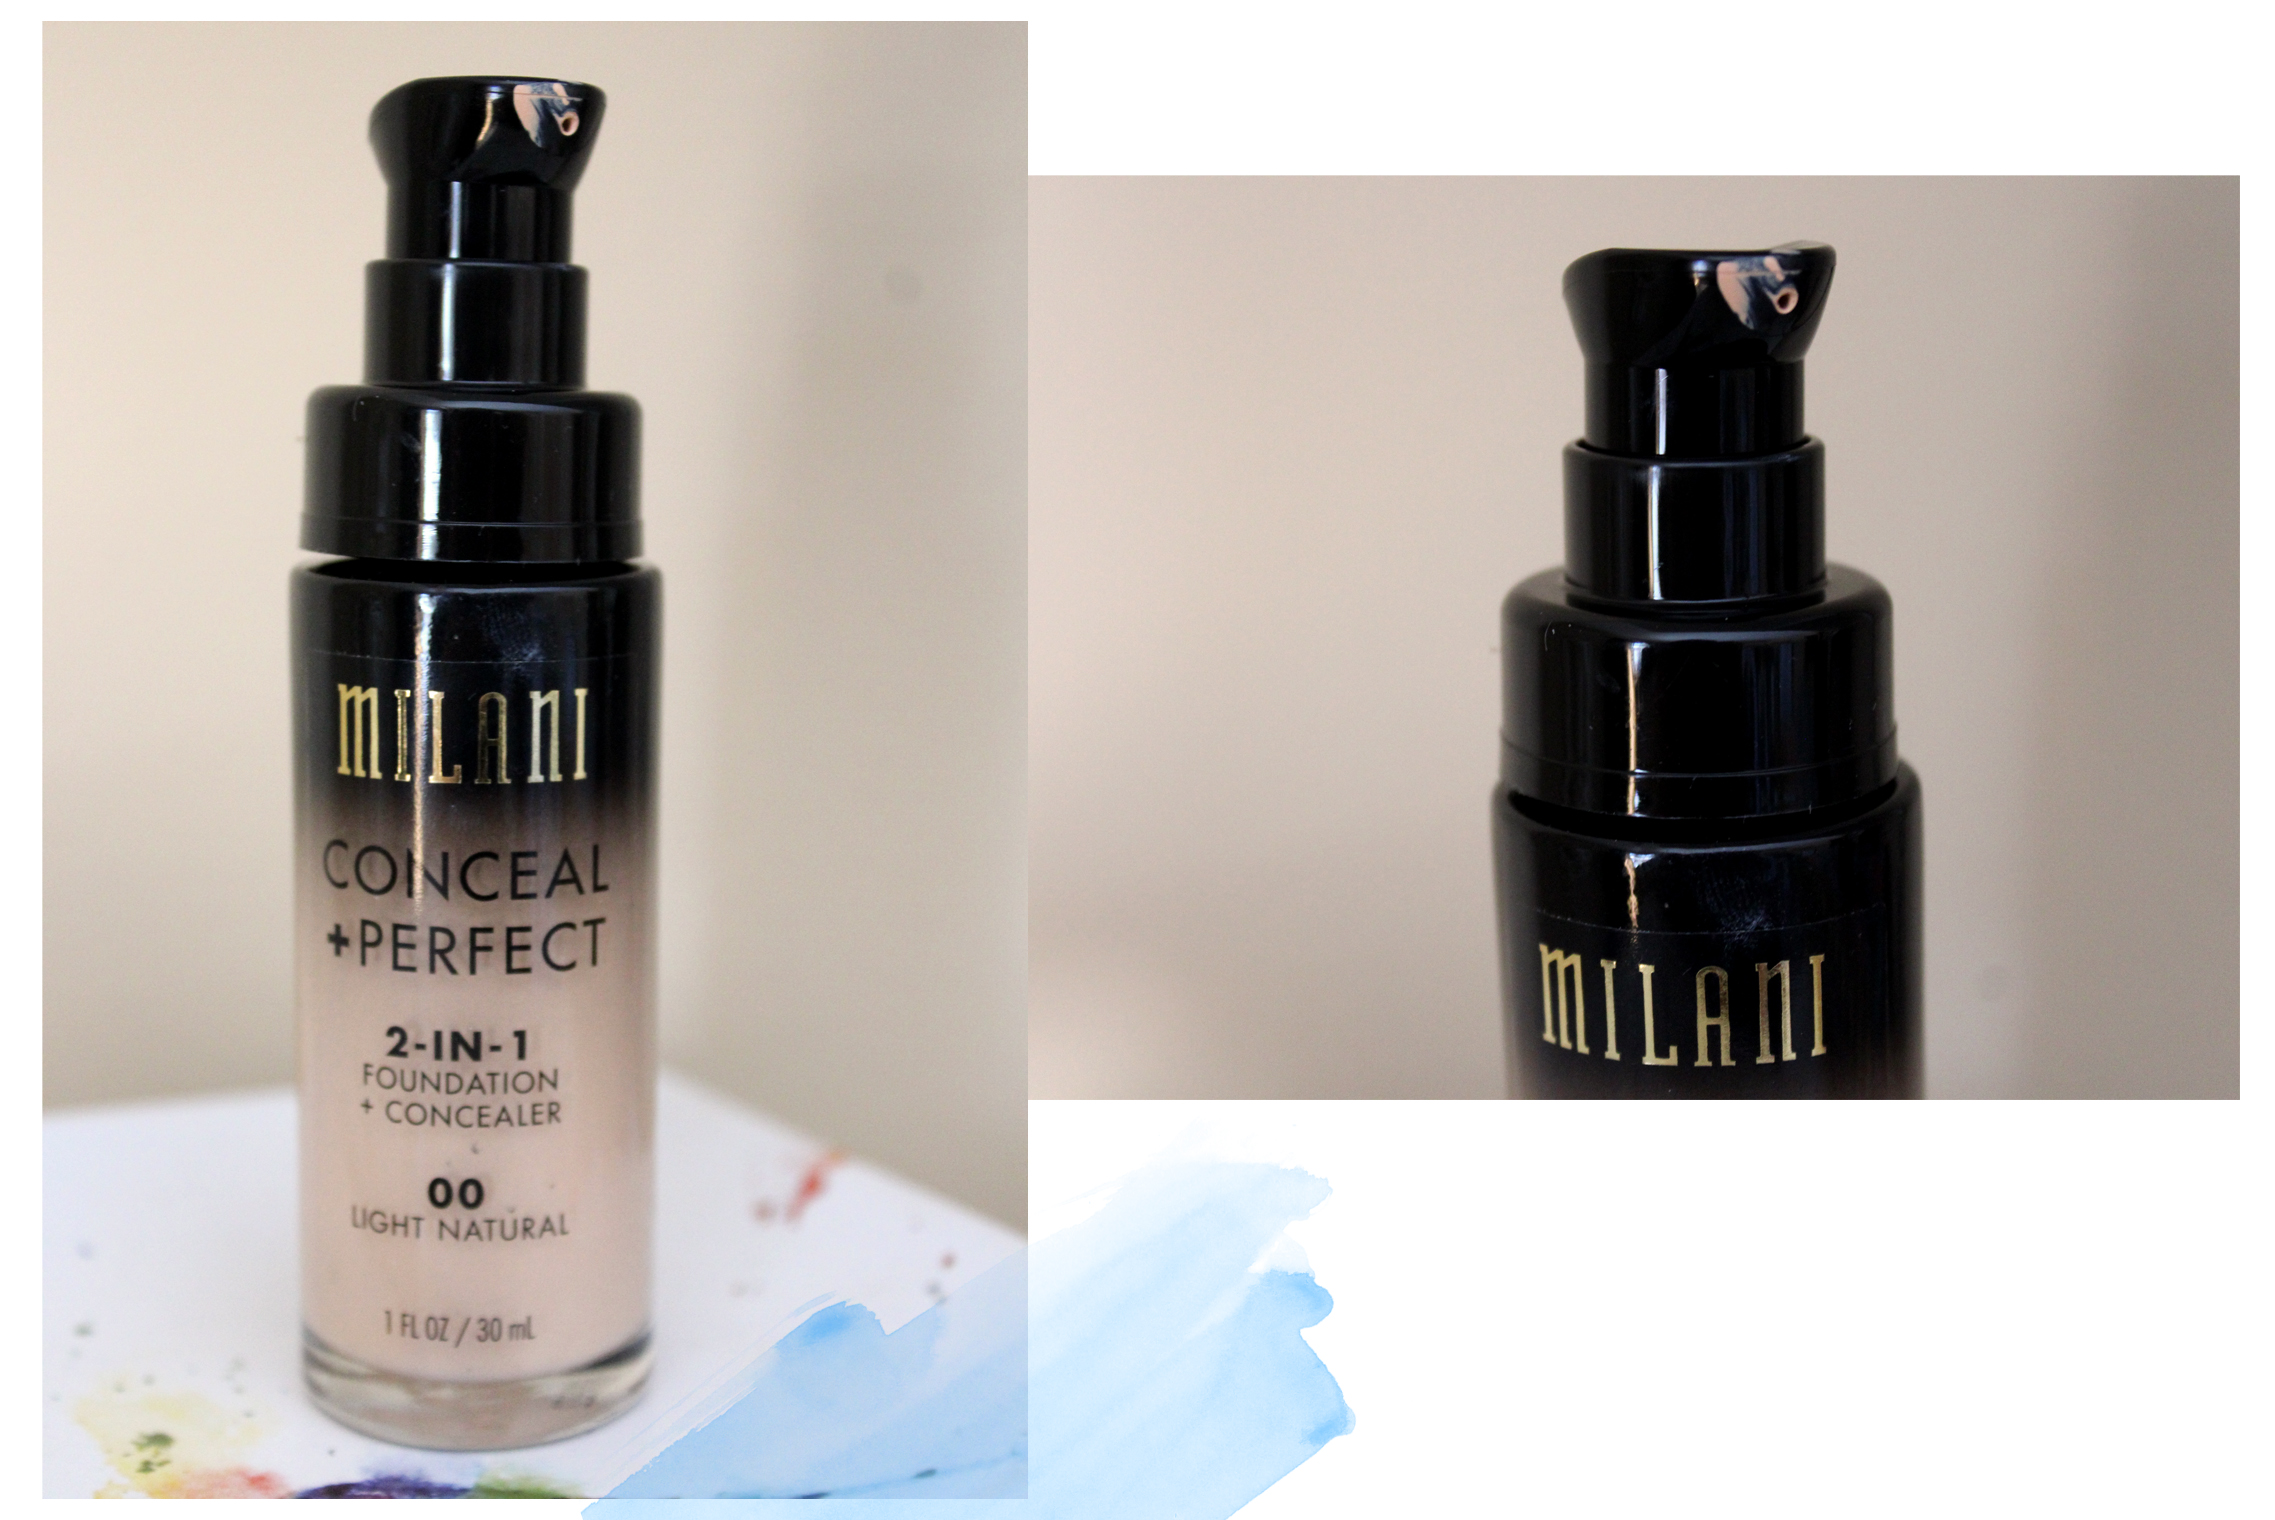 Milani Conceal + Perfect 2-in-1 Foundation + Concealer Light Natural Review